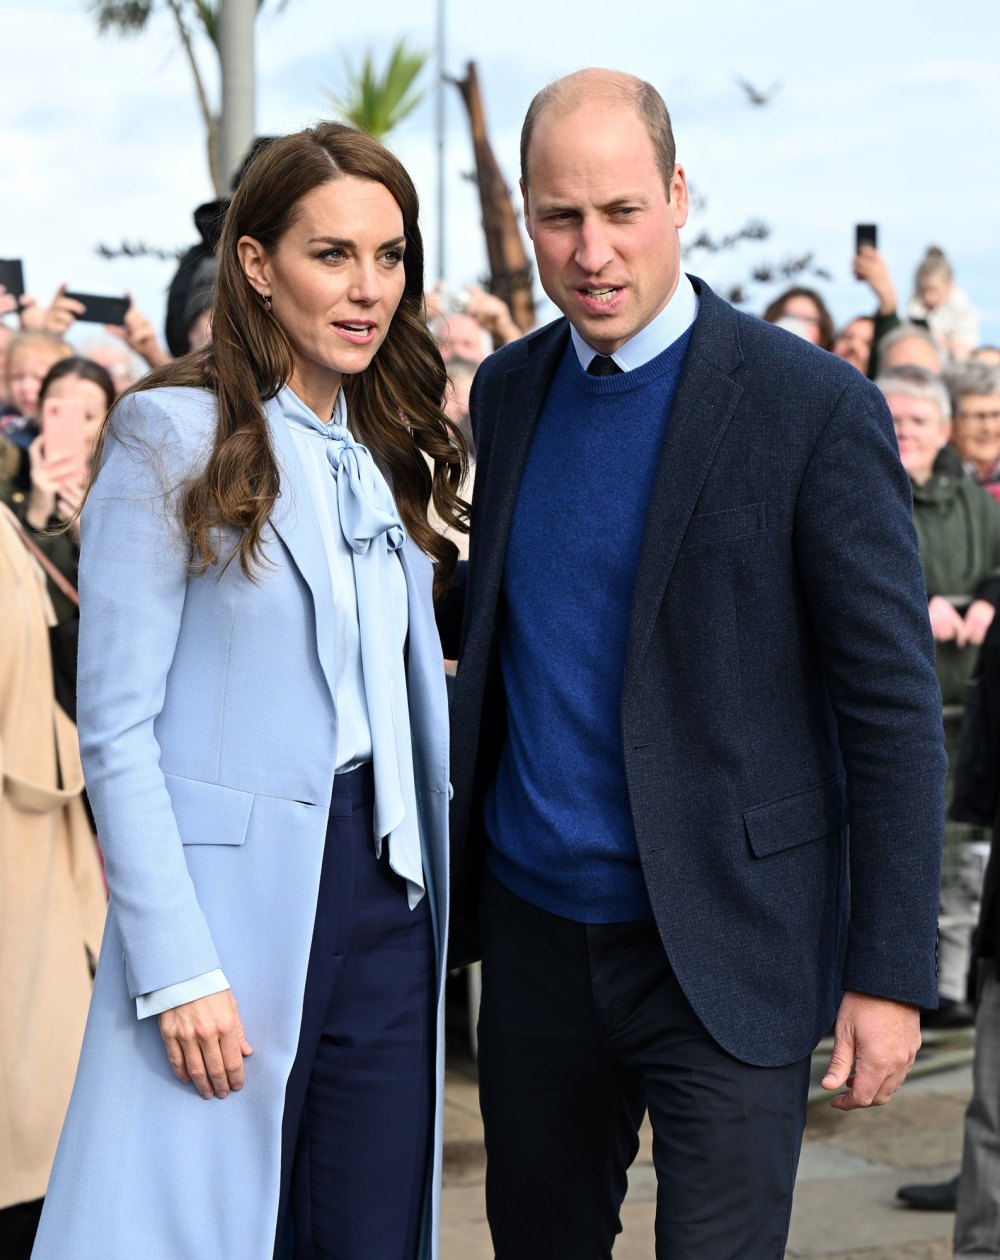 Prince William and Kate Middleton Had Falling Out With Rose Hanbury After Affair Rumors, Expert Says